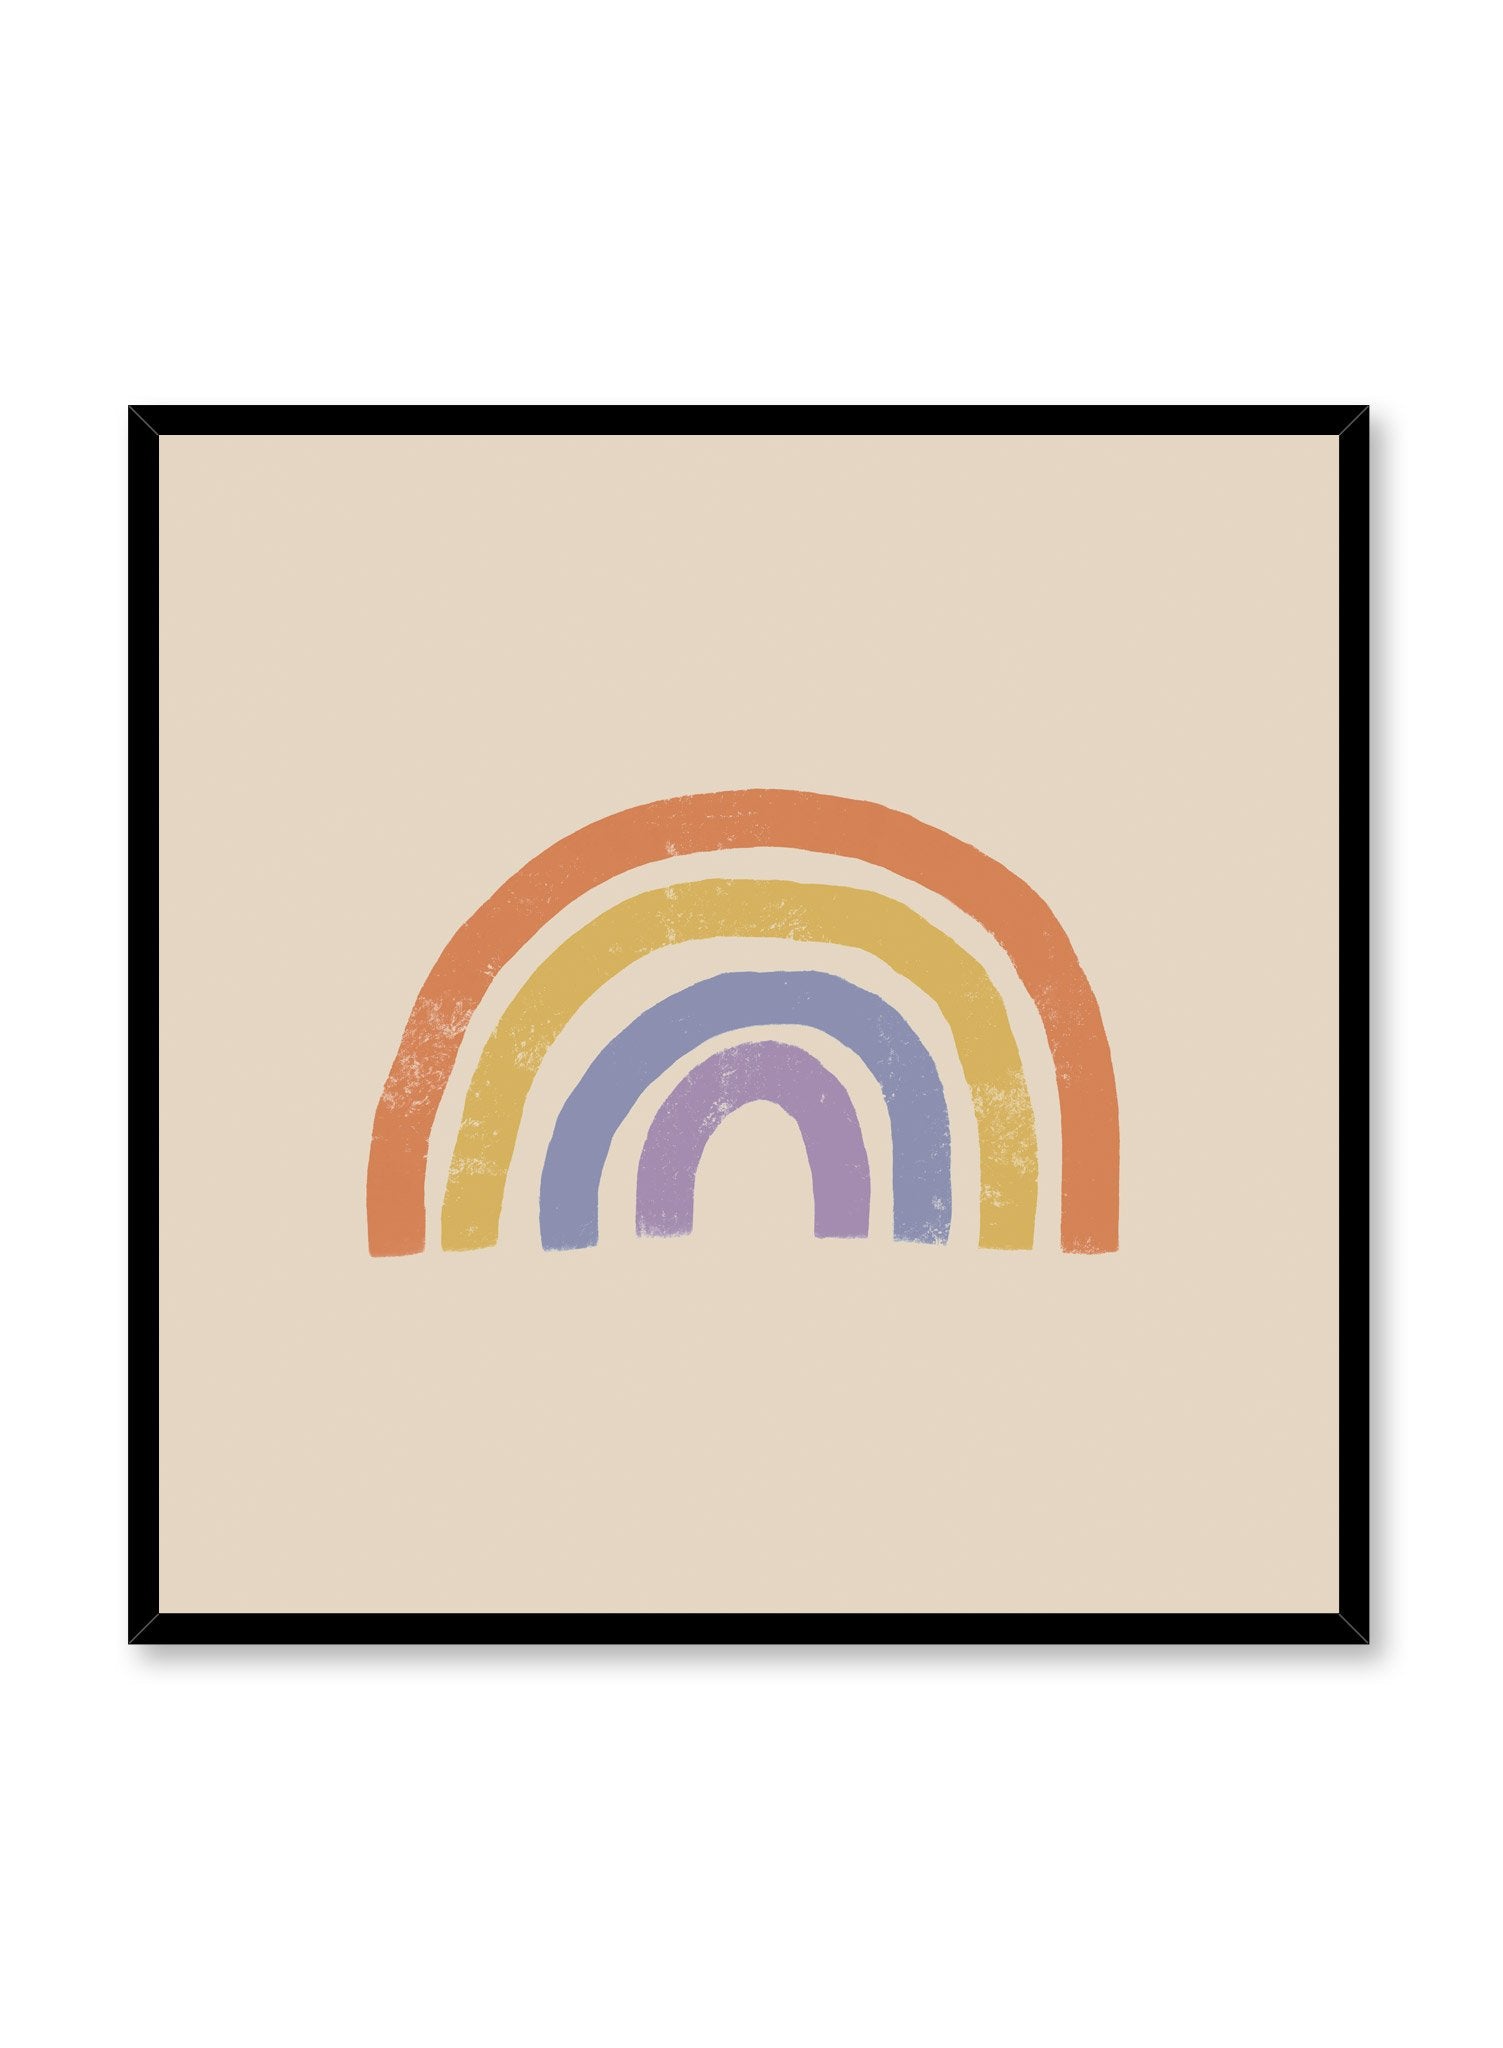 Modern minimalist poster by Opposite Wall with abstract design of Rainbow in square format